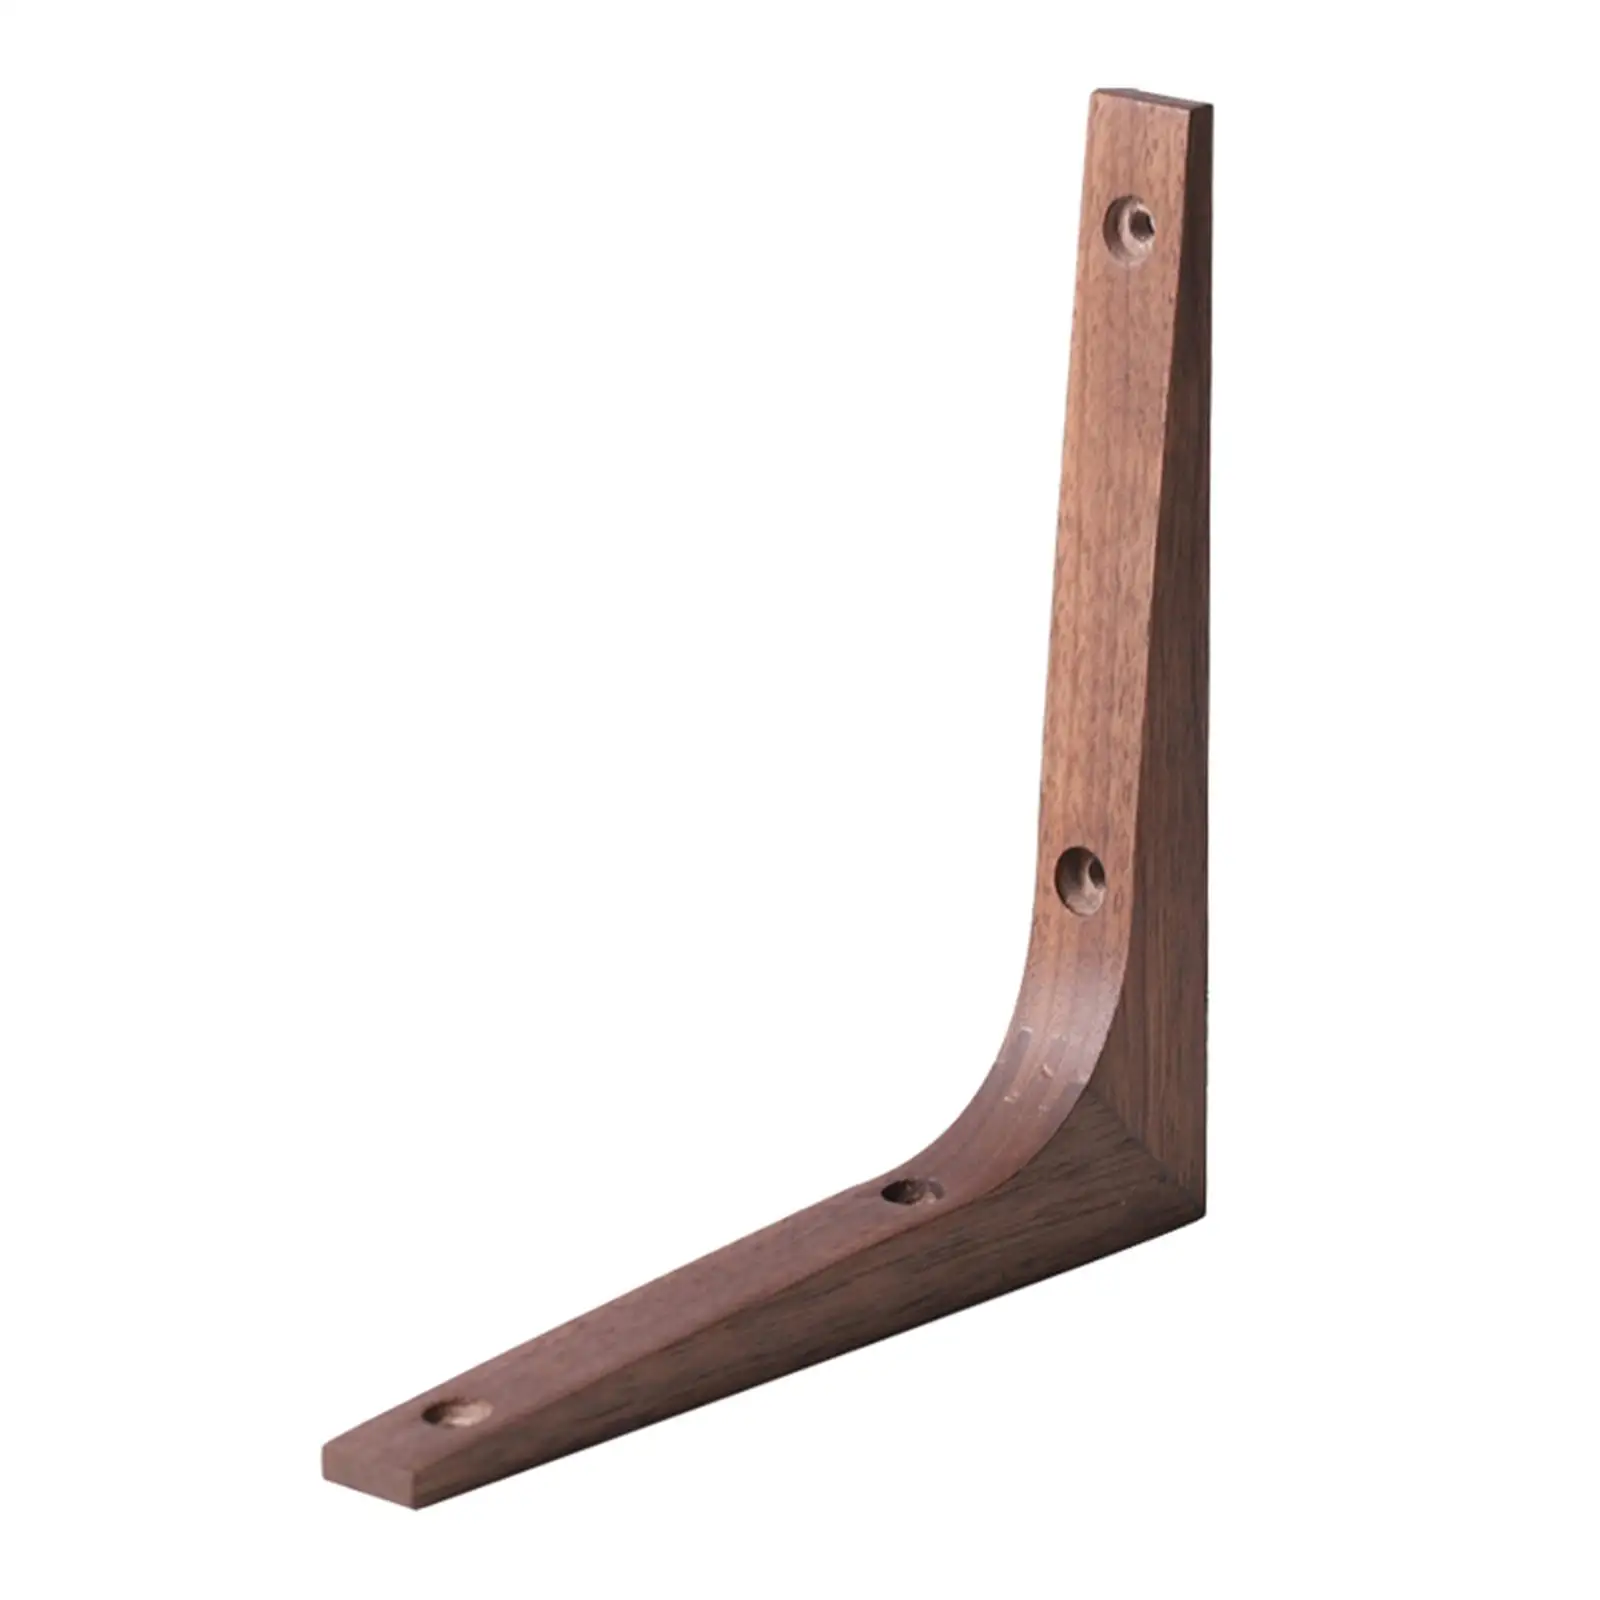 Solid Wood Triangle Selves Bracket Corner Brace Shelf Supports 90 Degree Wall Mounted L Shaped Shelving Brackets for Home Decor